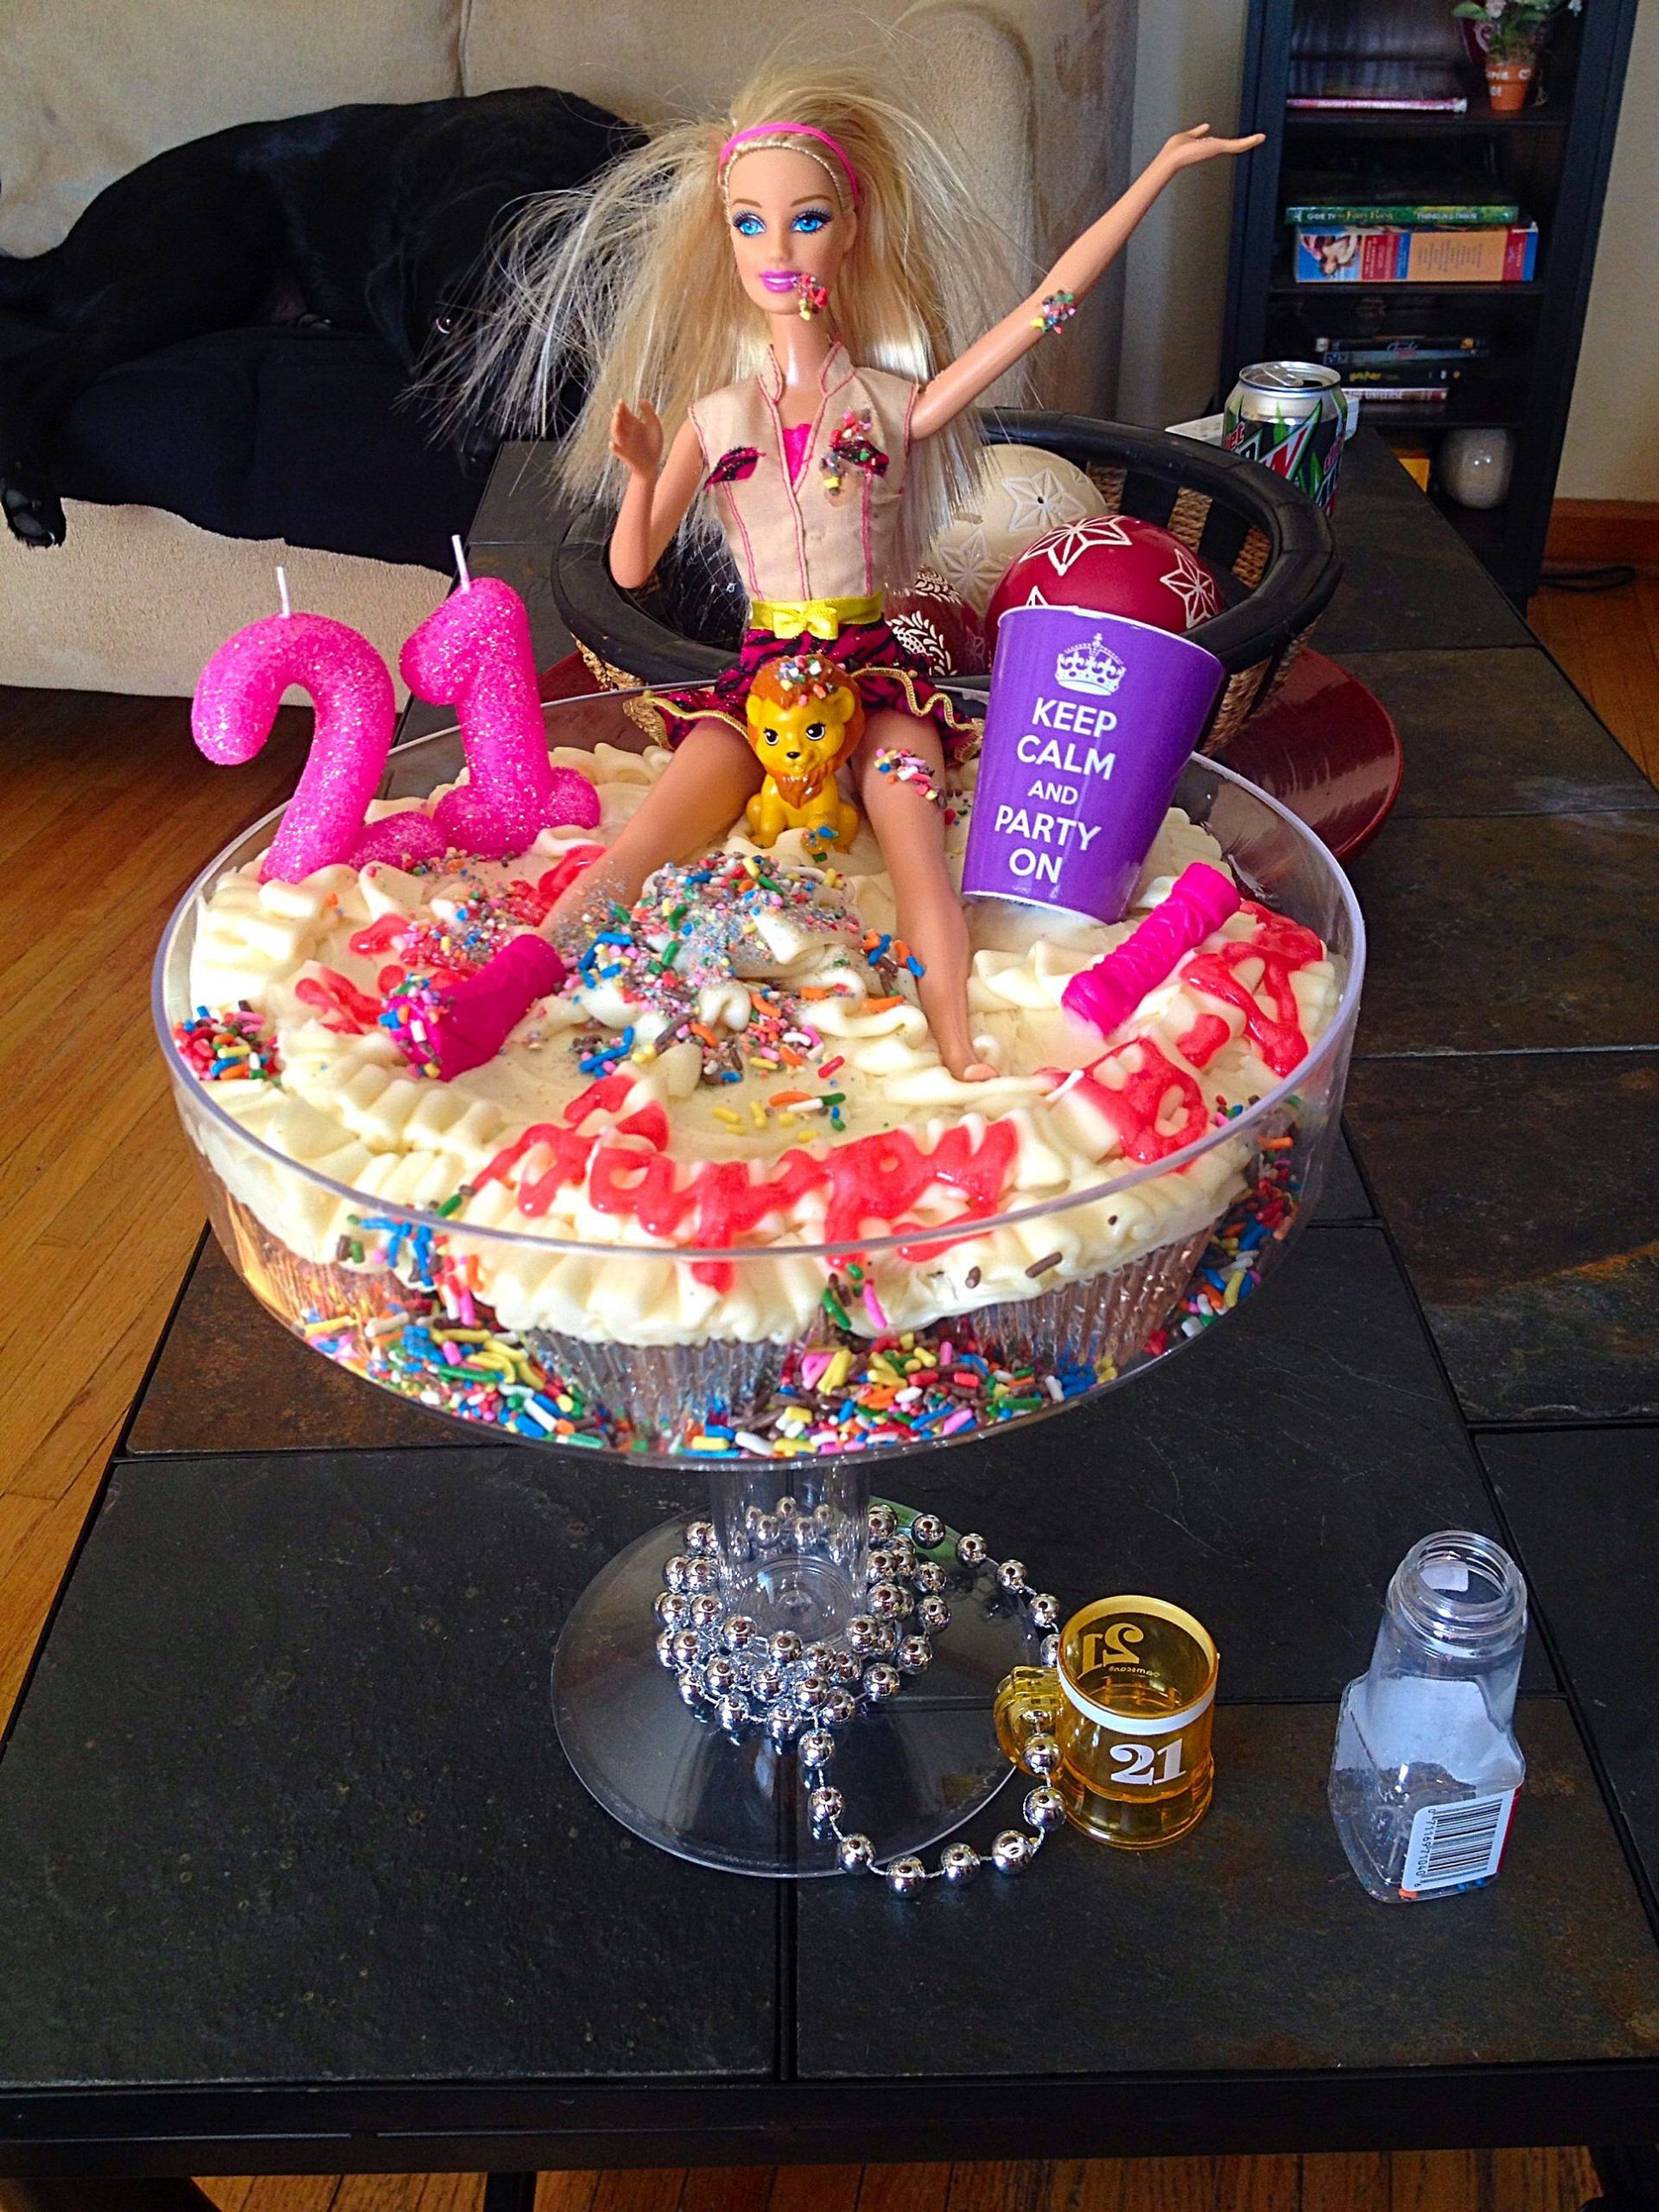 21st Birthday Cake Barbie
 Pin on Lets Get Crafty